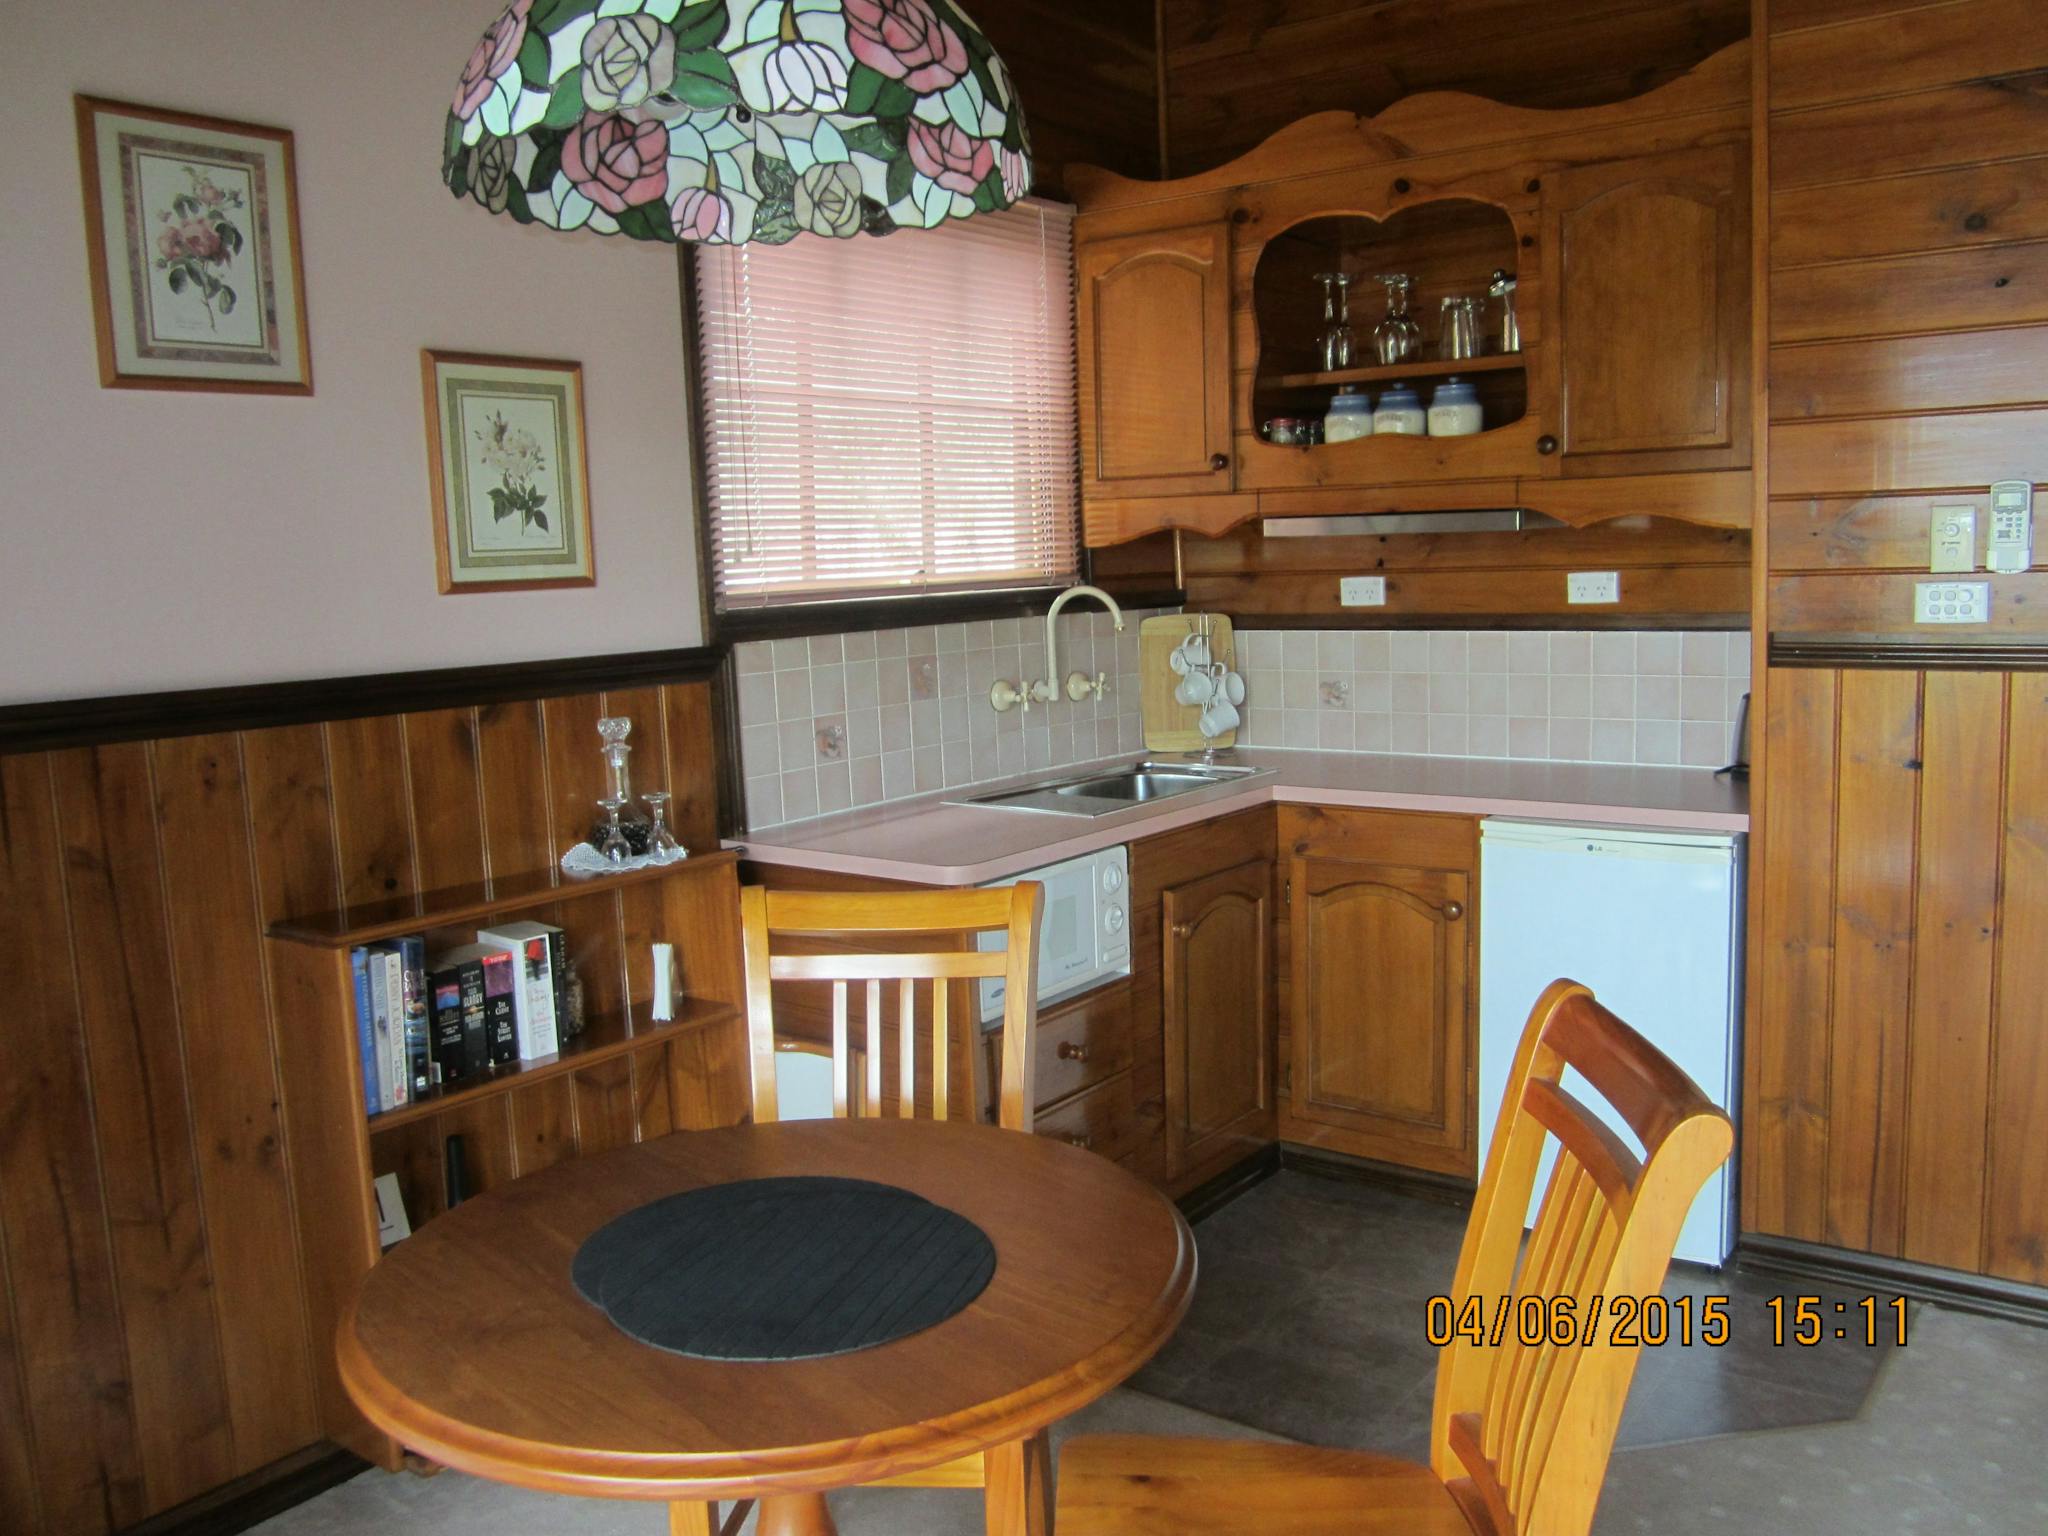 Dining and Kitchenette area